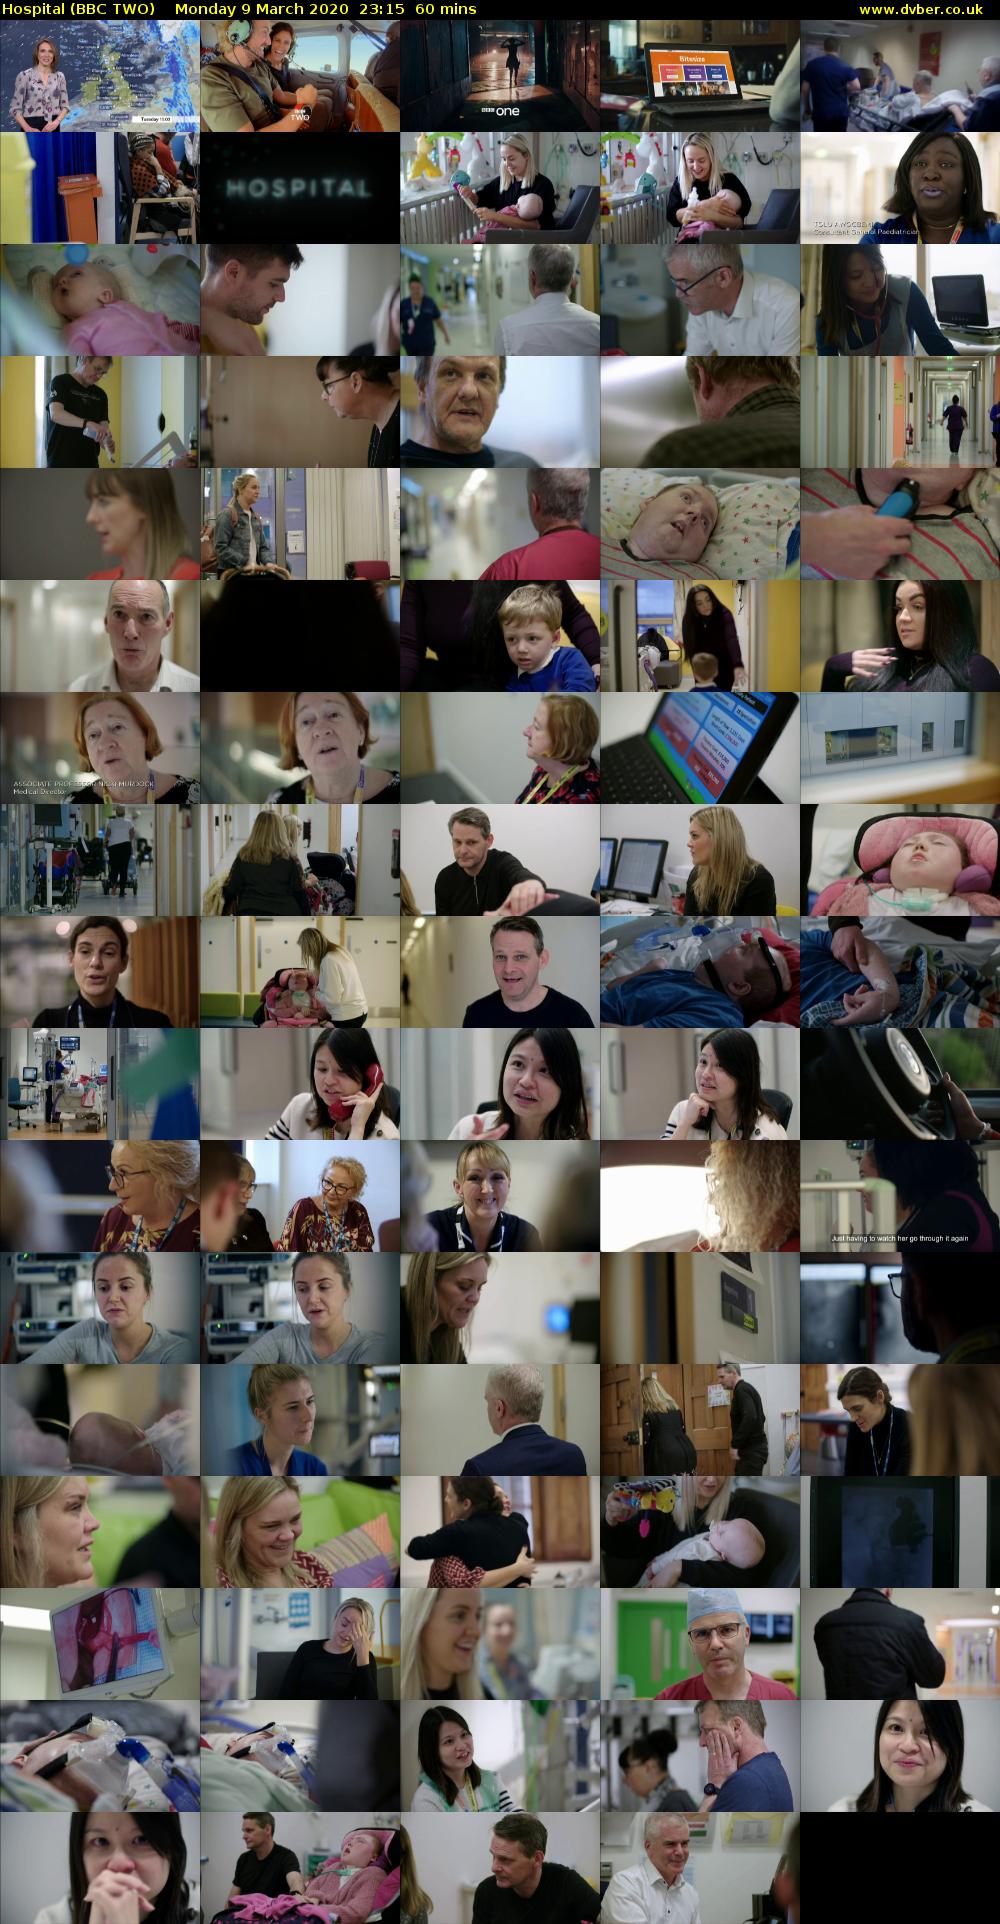 Hospital (BBC TWO) Monday 9 March 2020 23:15 - 00:15